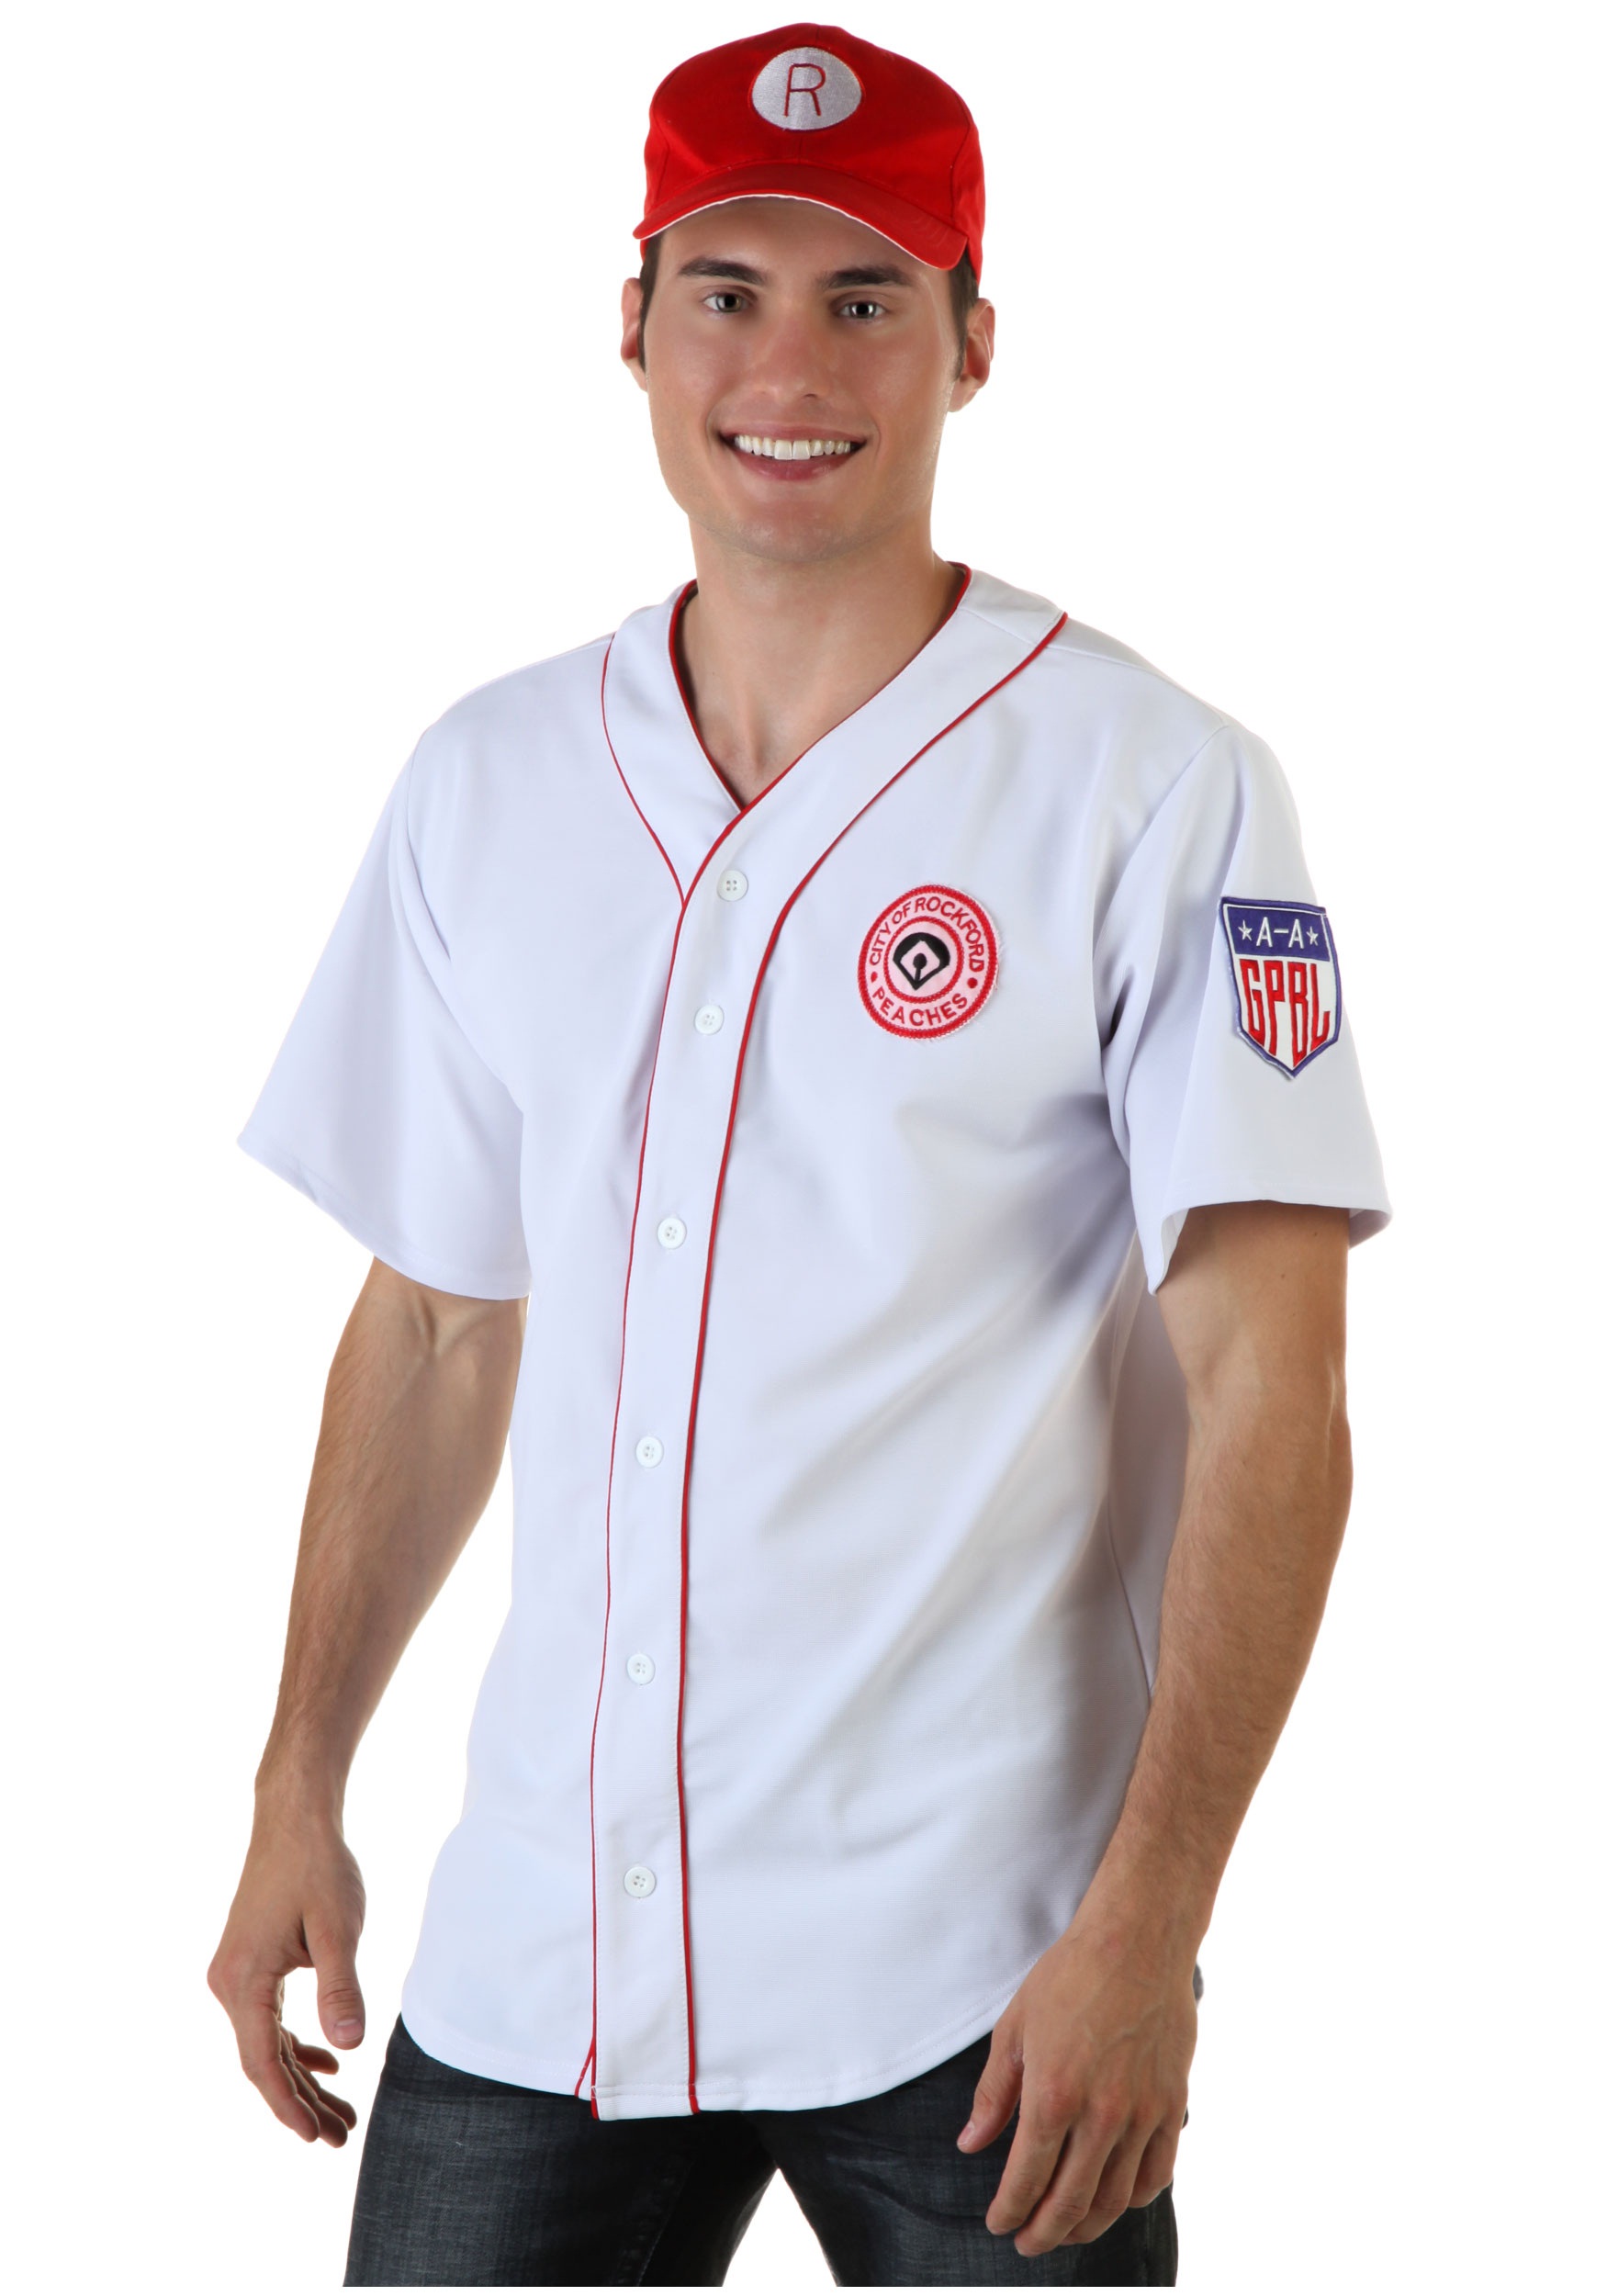 Deluxe City of Rockford Peaches Men's Adult Jersey costume set